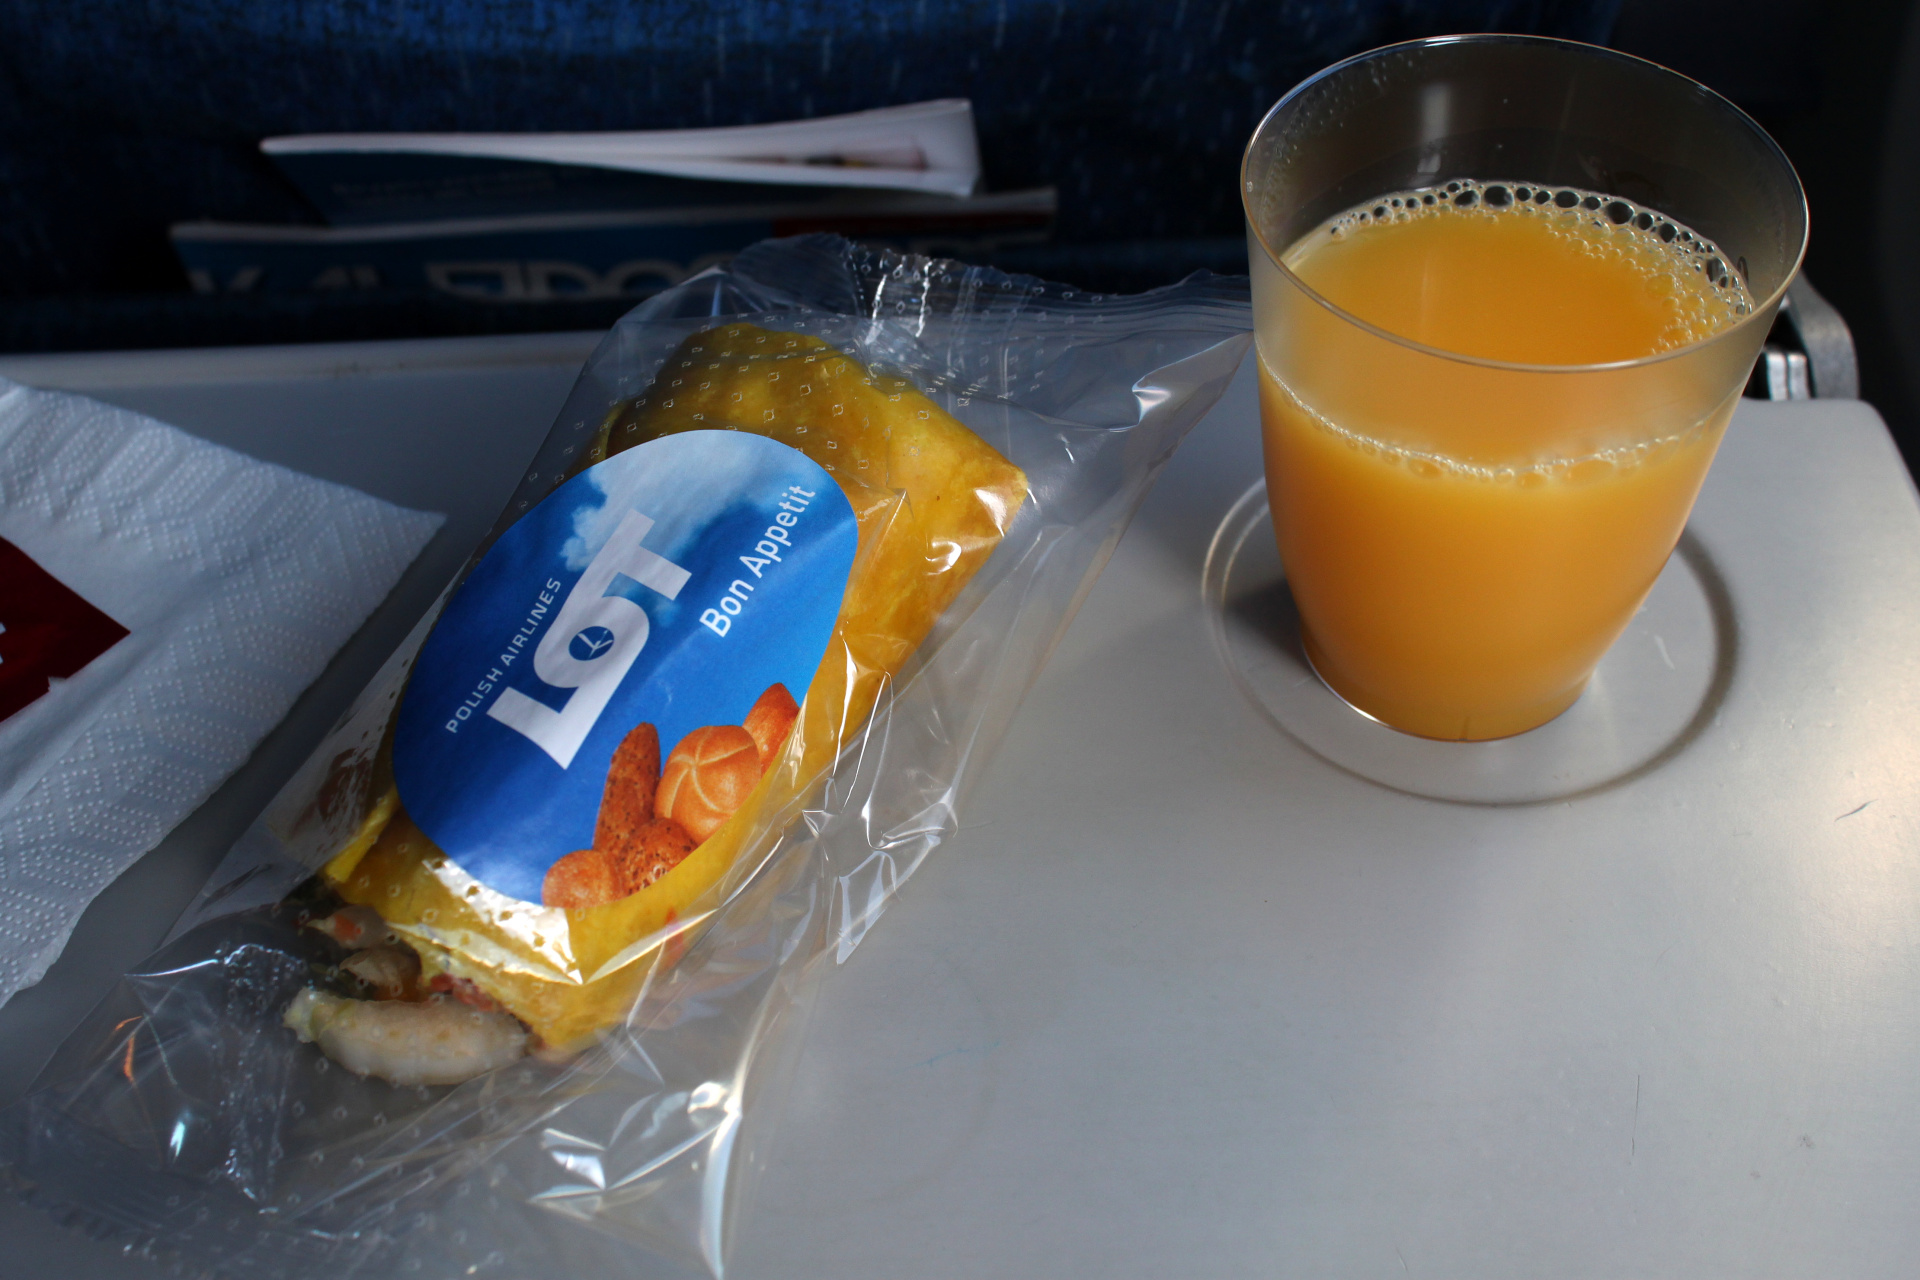 WAW-LHR: Snack (Travels » US Trip 3: The Roads Not Taken » The Flights)